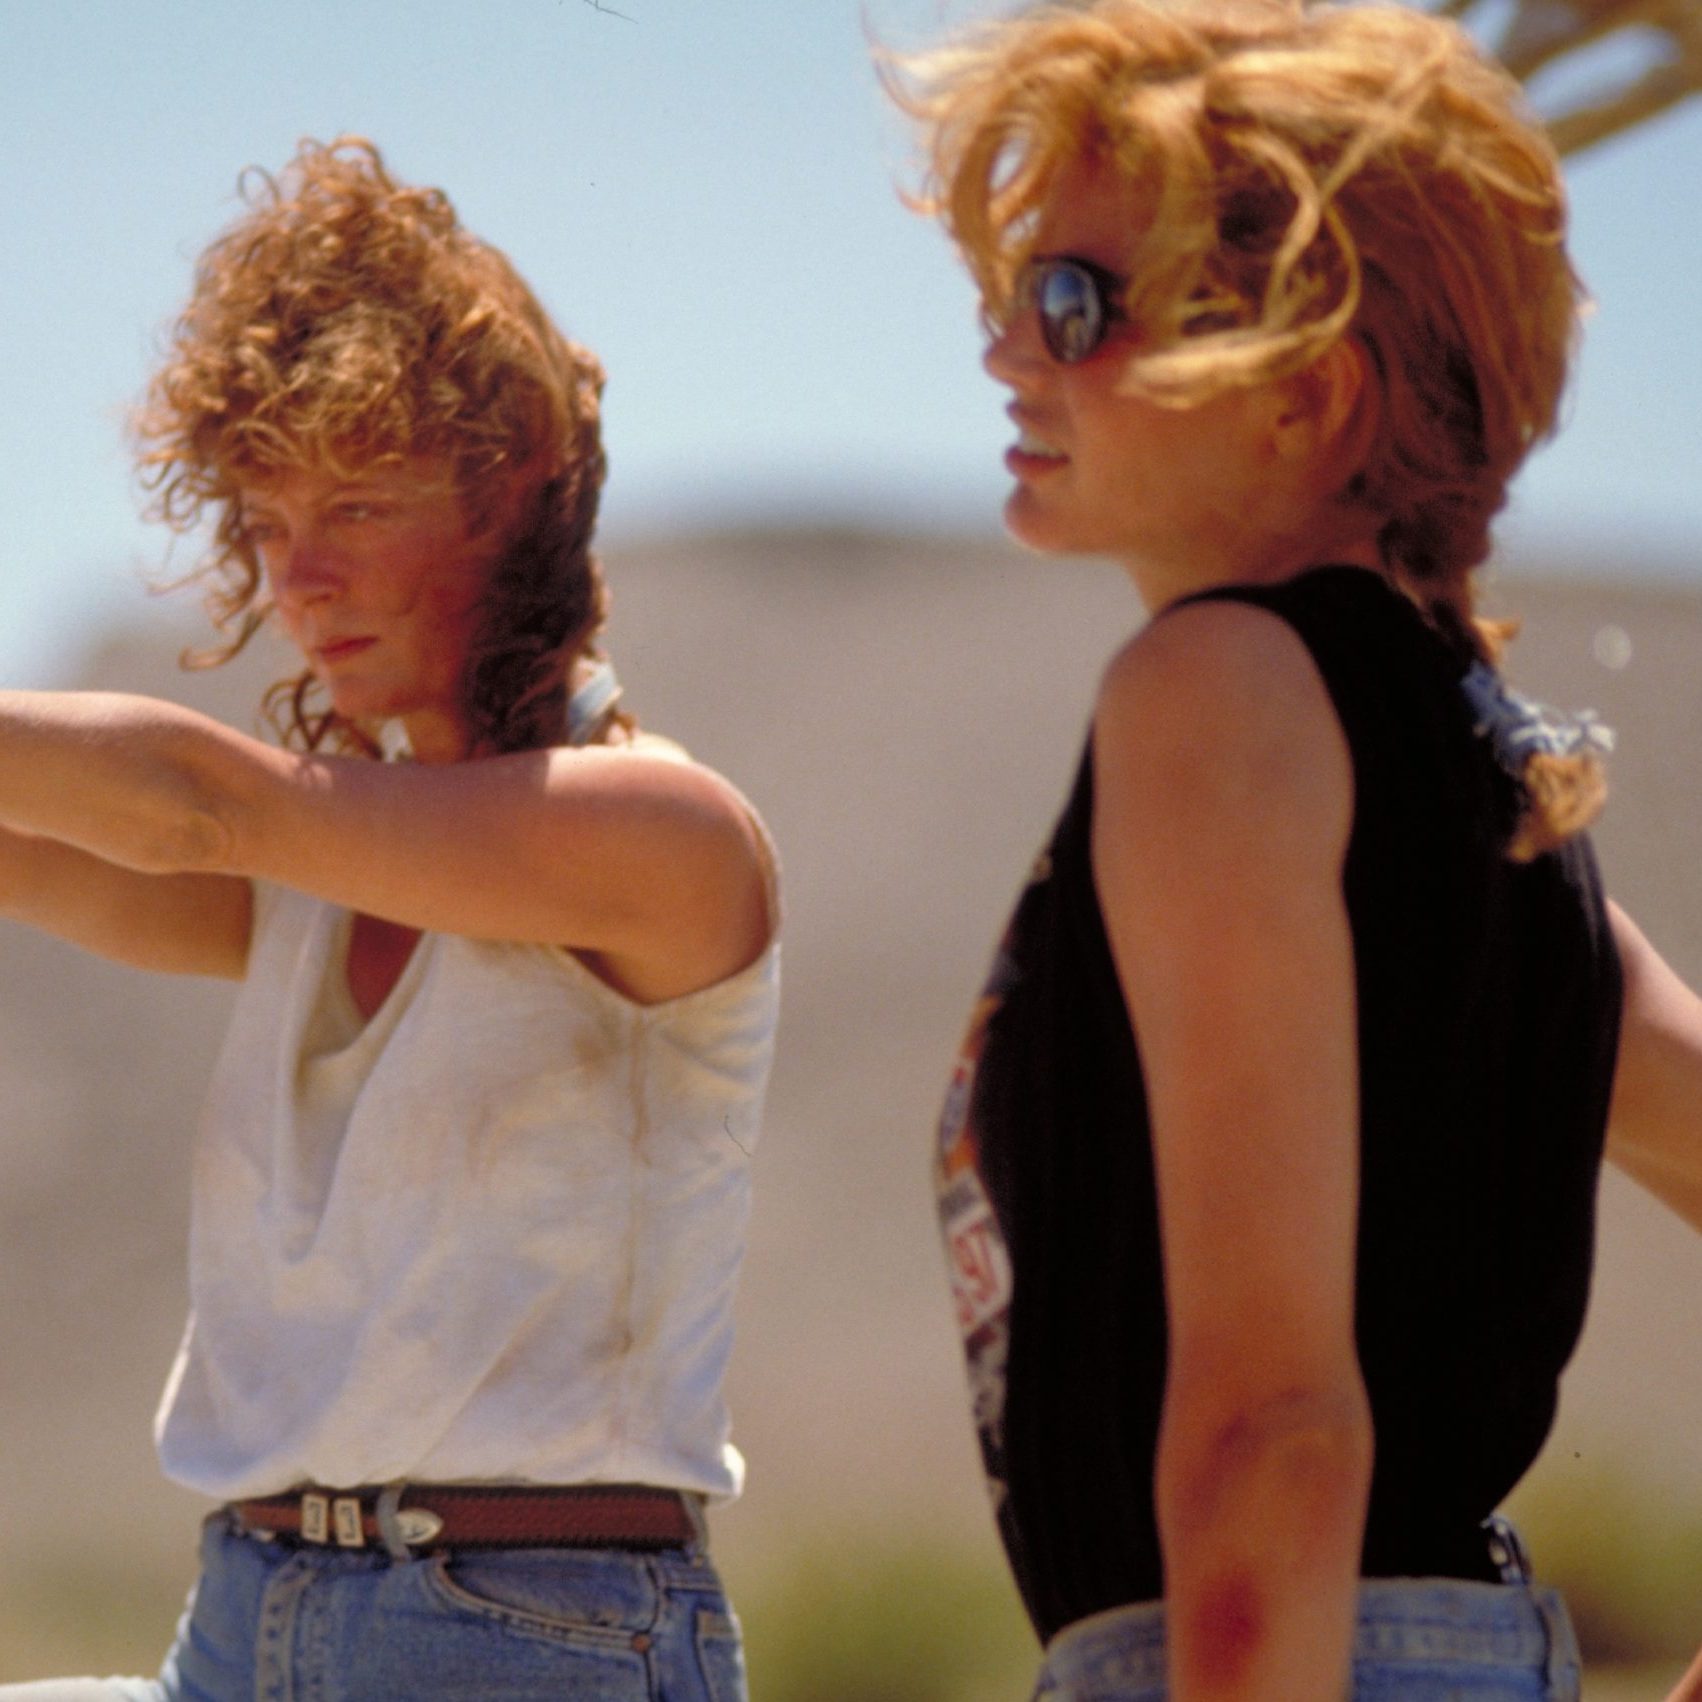 Thelma And Louise – The Spac Hole